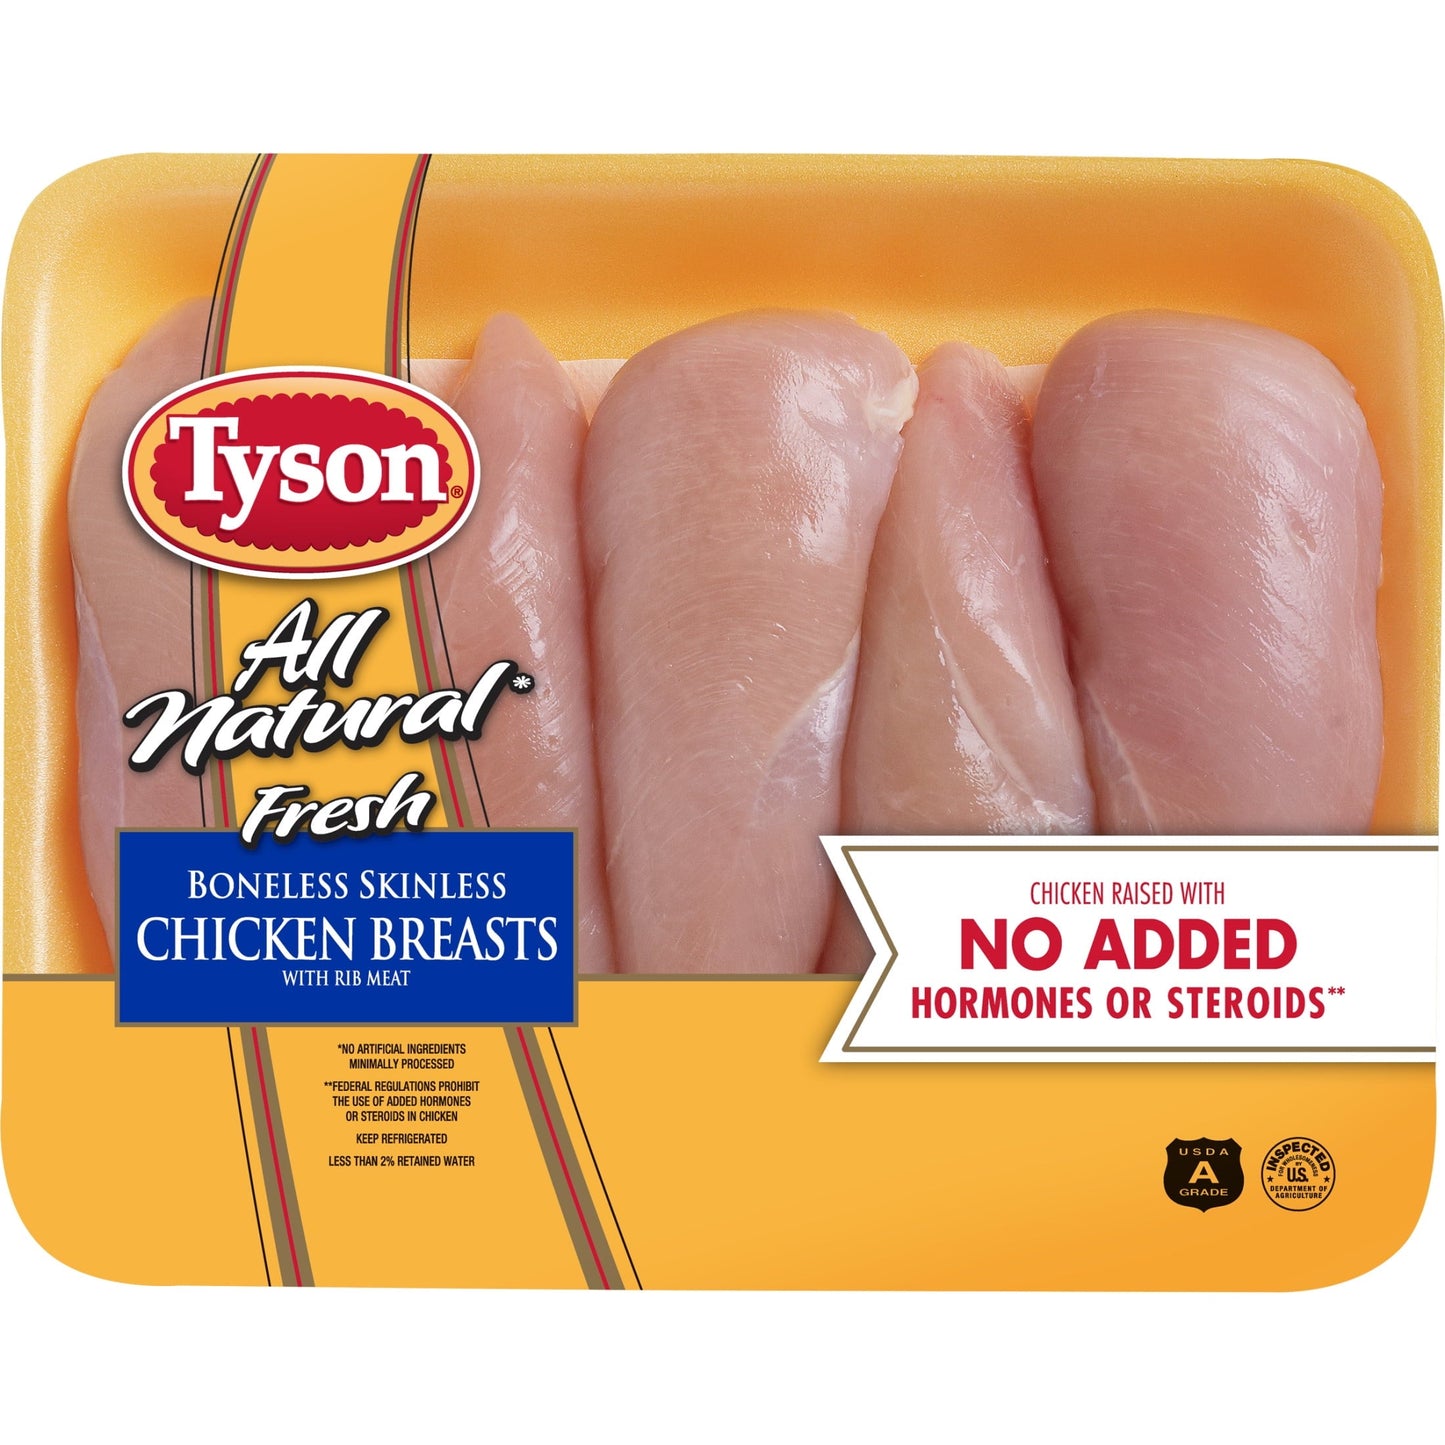 Tyson All Natural, Fresh, Boneless, Skinless Chicken Breasts, 2.5 - 4.0 lb Tray, 2.5 - 4.0 lb Tray